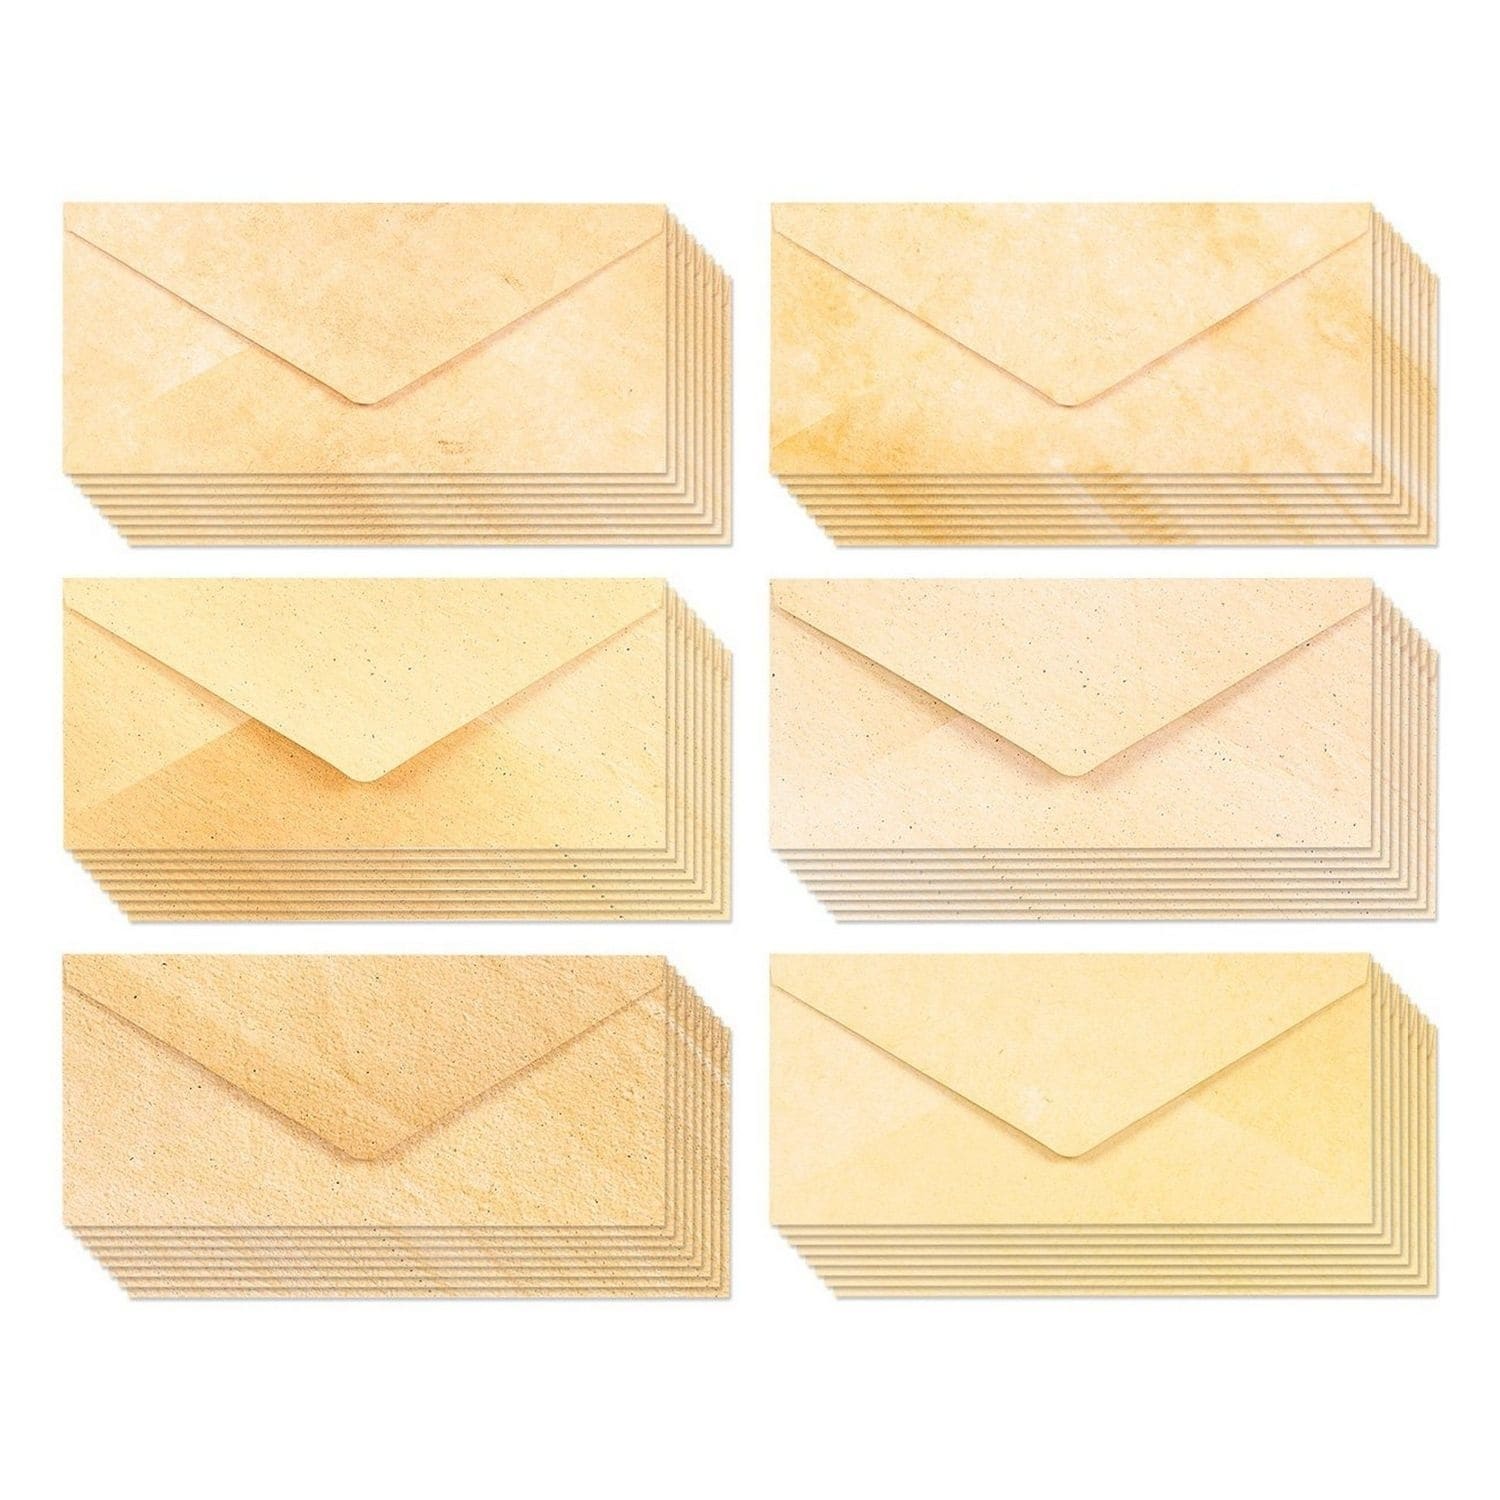 48 Pack Aged Antique Stationery Envelopes - Classi...